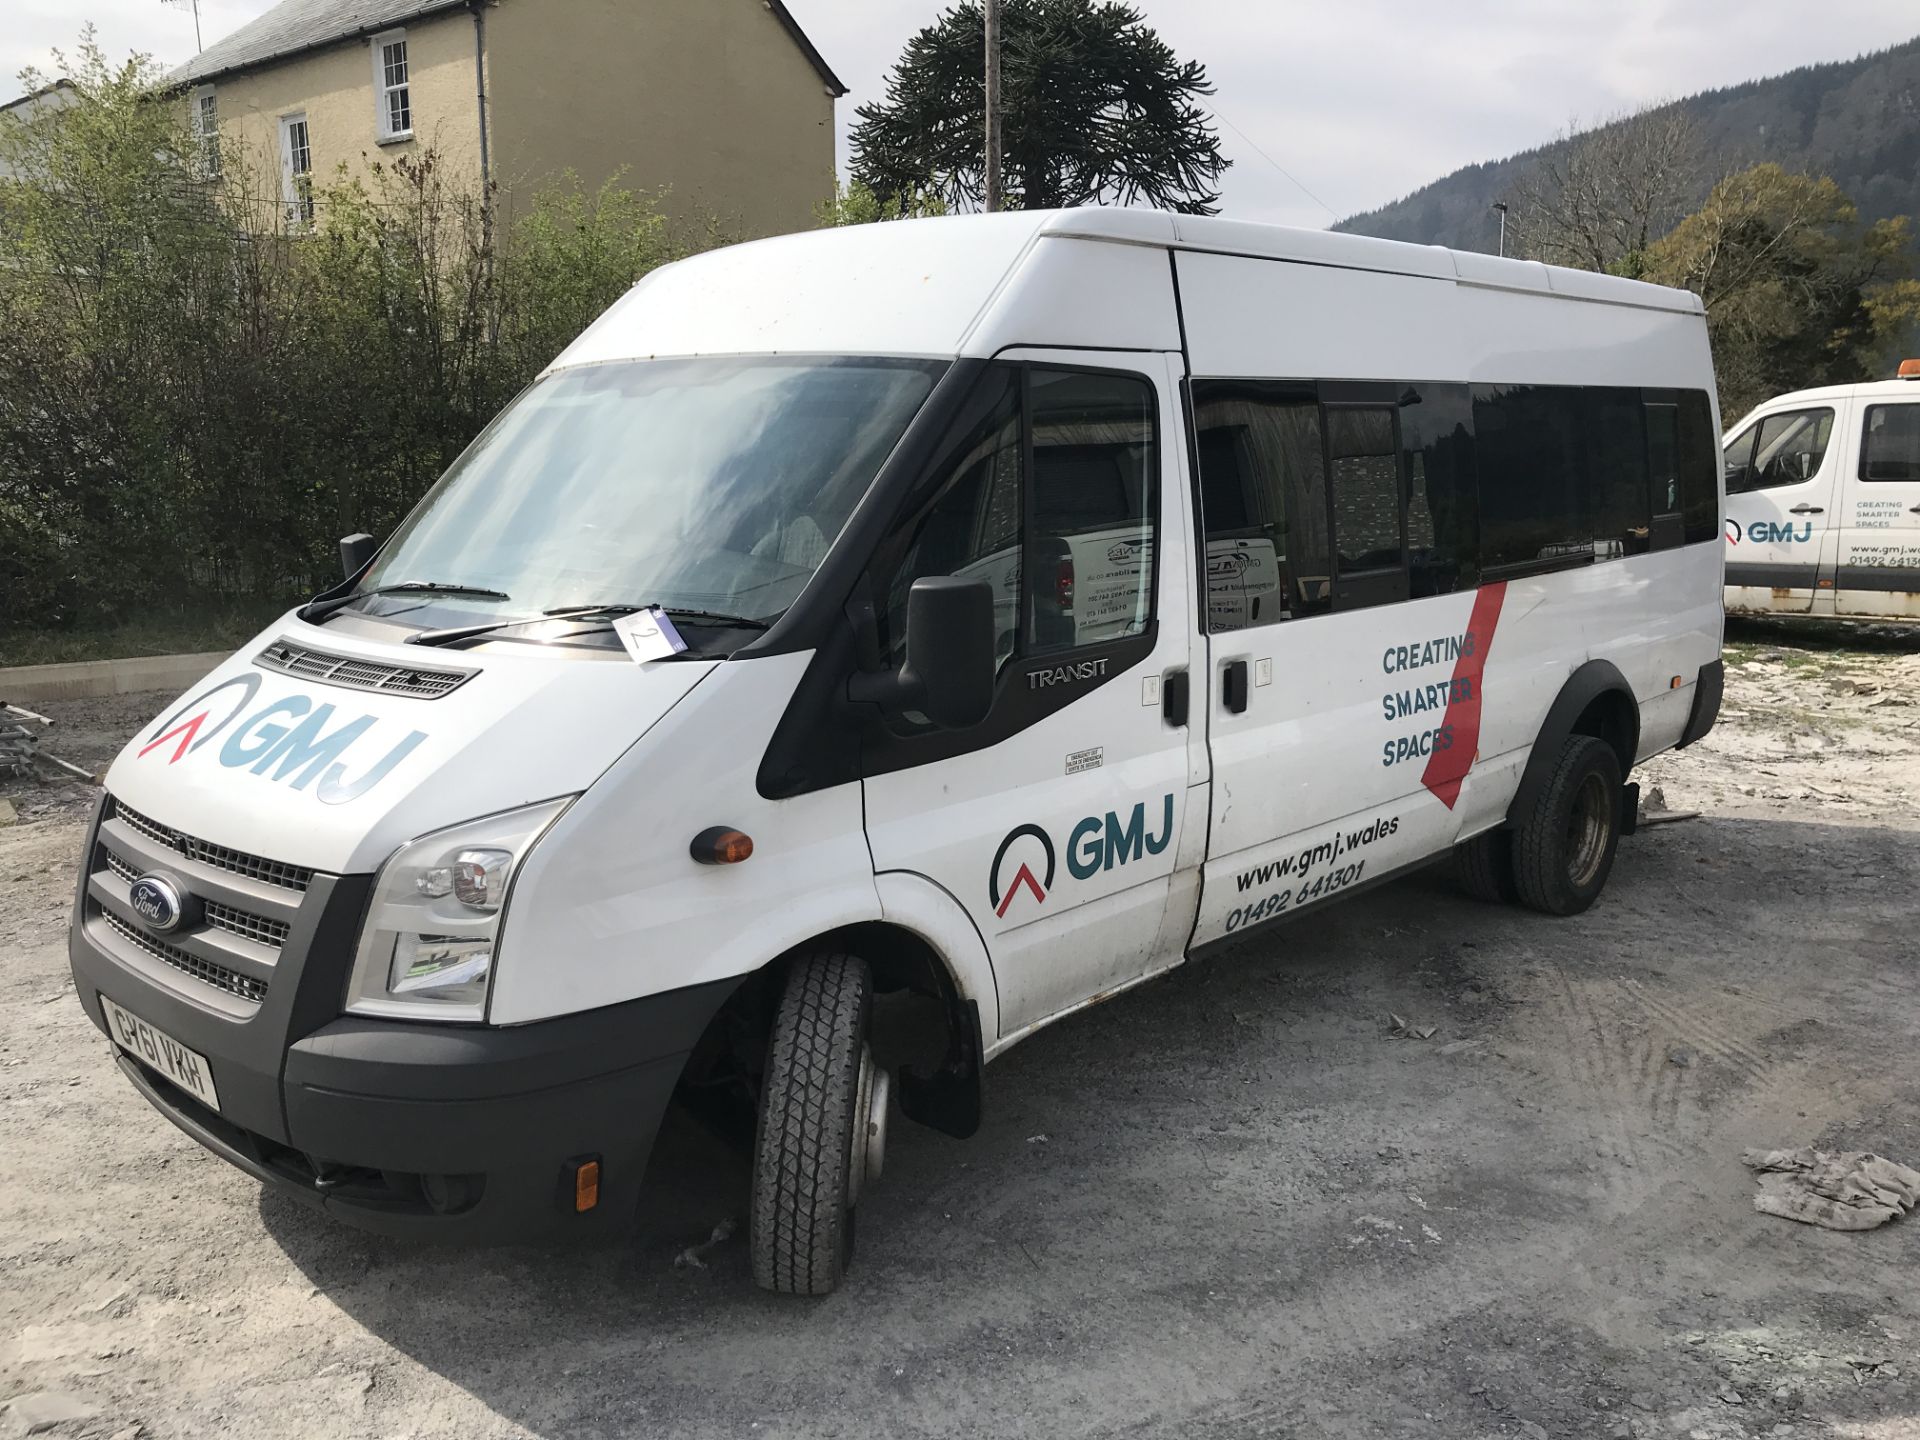 Ford Transit 135 T430 RWD Diesel 17-Seater Minibus, registration no. GY61 VKH, date first registered